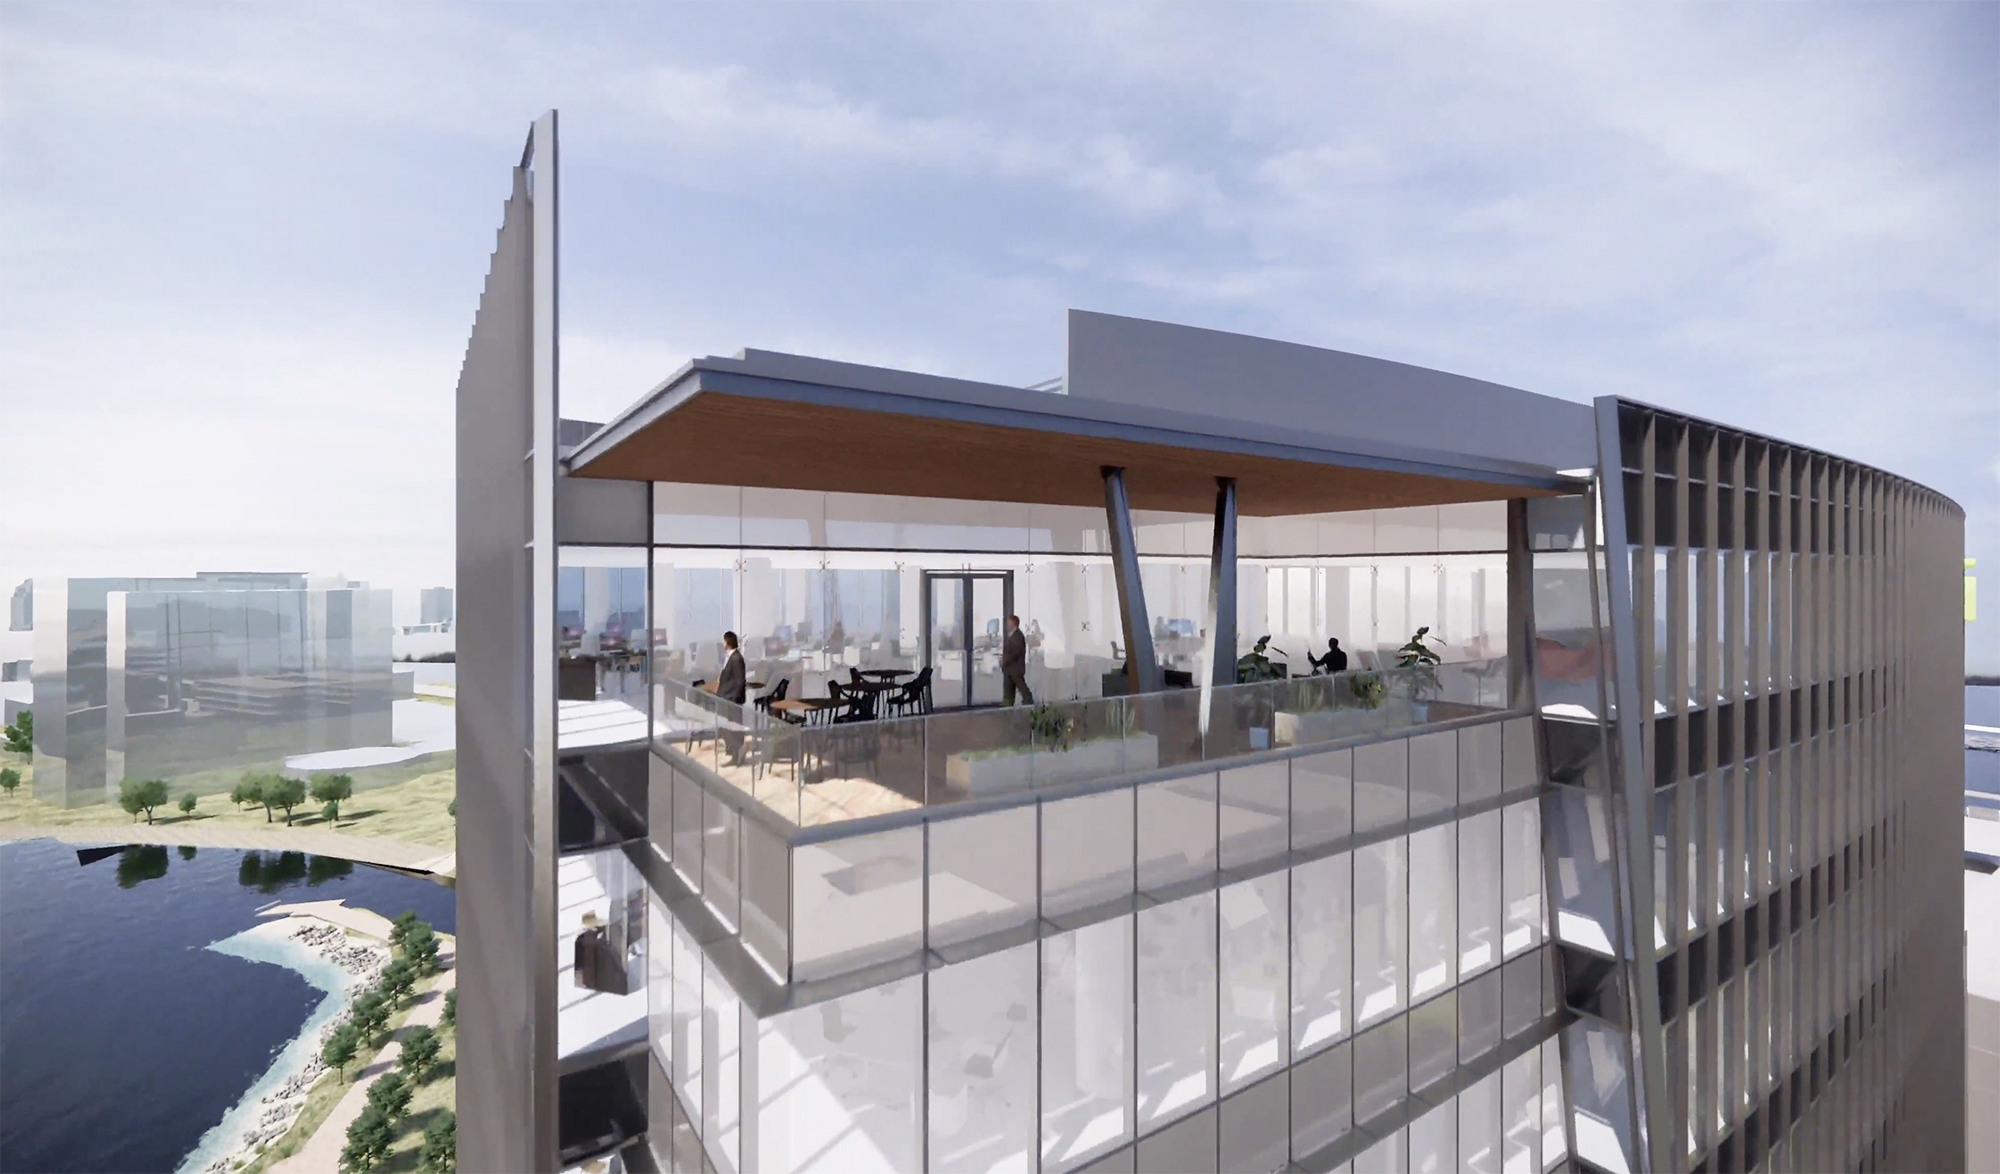 A rendering of the new FIS headquarters shows an open-air area at the top of the 12-story tower.